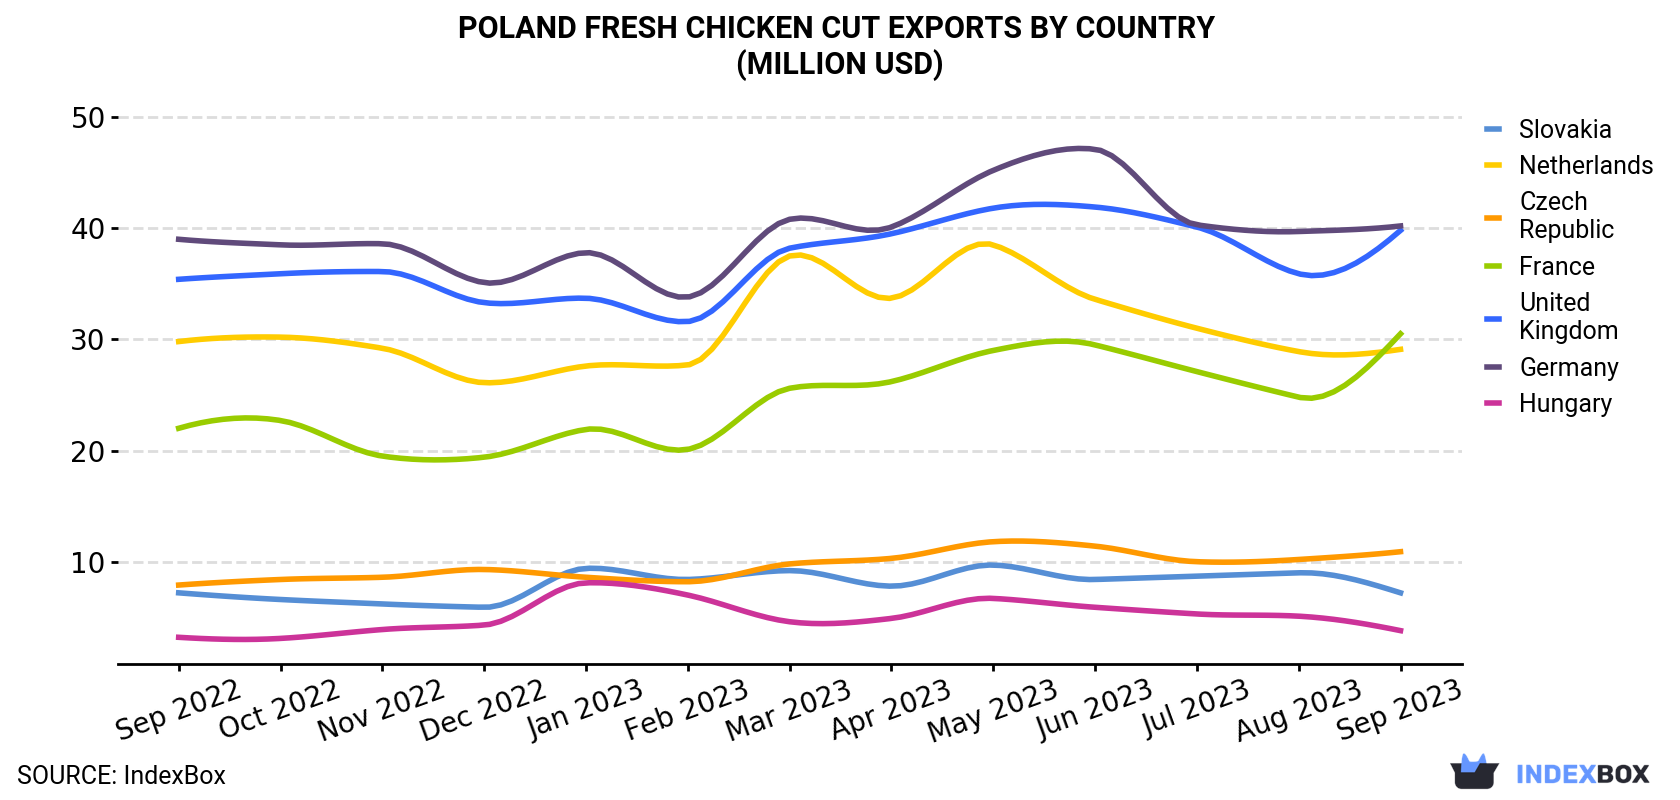 Poland Fresh Chicken Cut Exports By Country (Million USD)